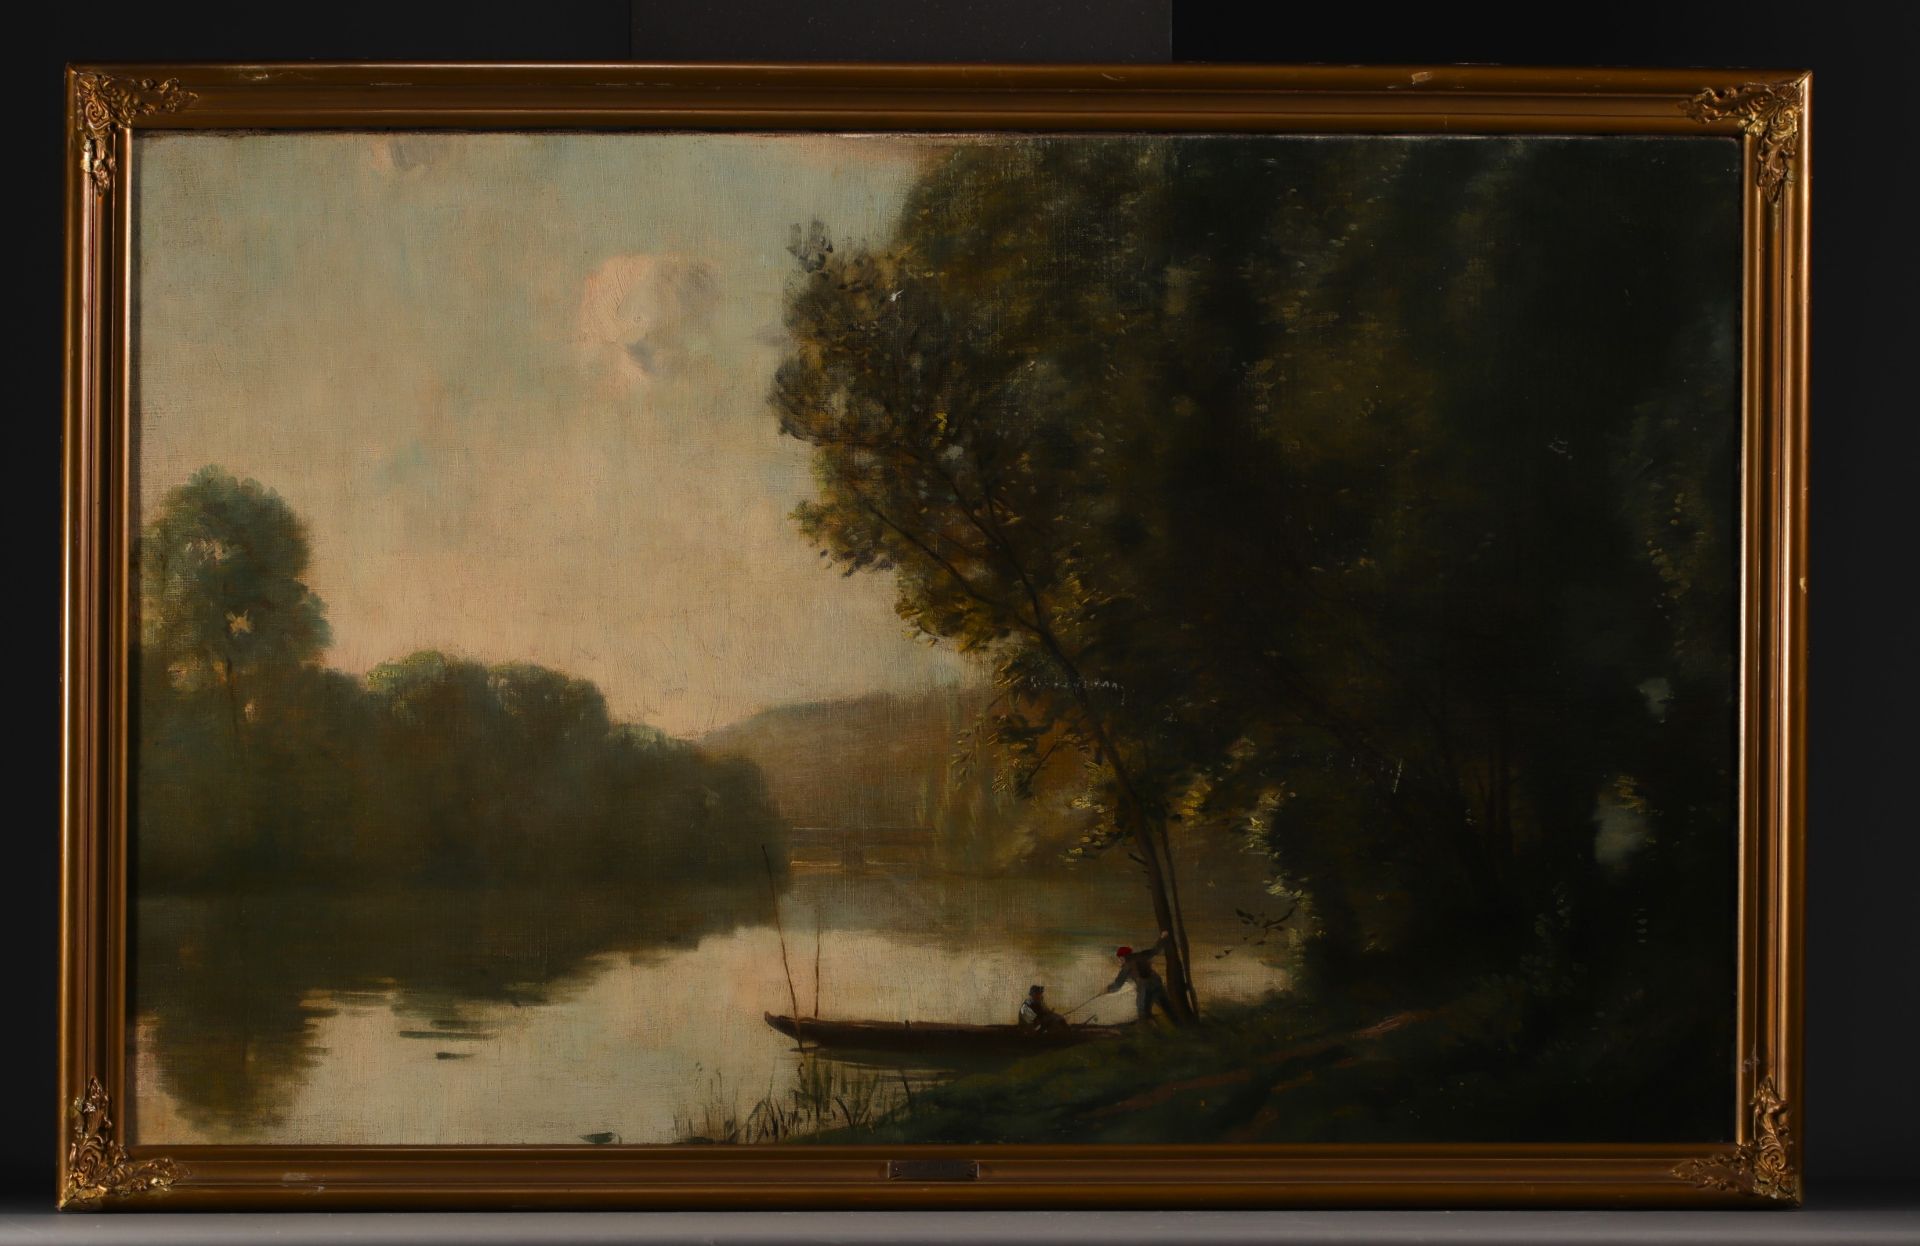 "Oil on canvas, Barbizon school in the style of Camille COROT, late 19th century. - Image 2 of 2